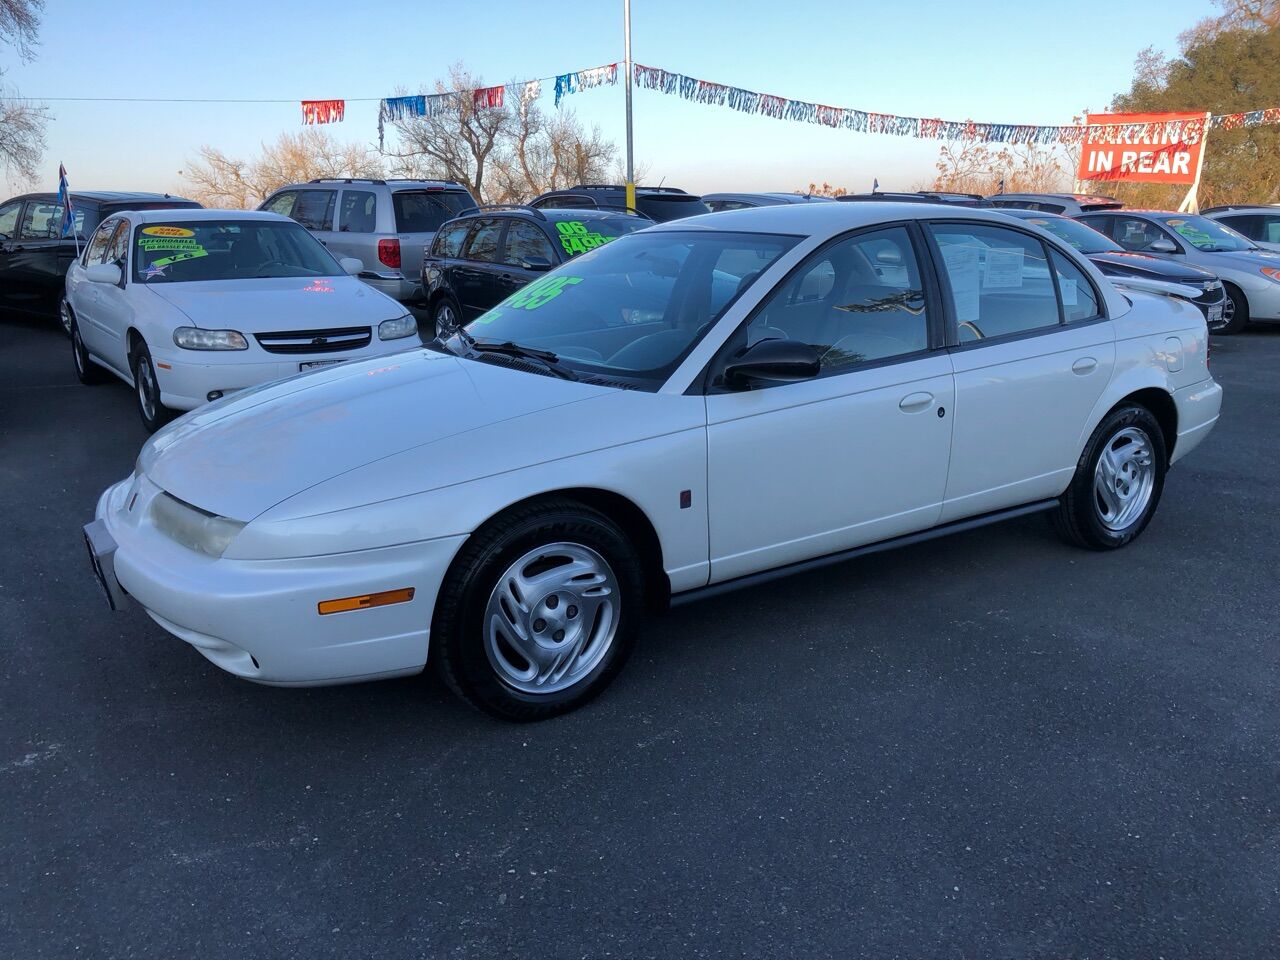 Saturn S-Series For Sale In California - Carsforsale.com®